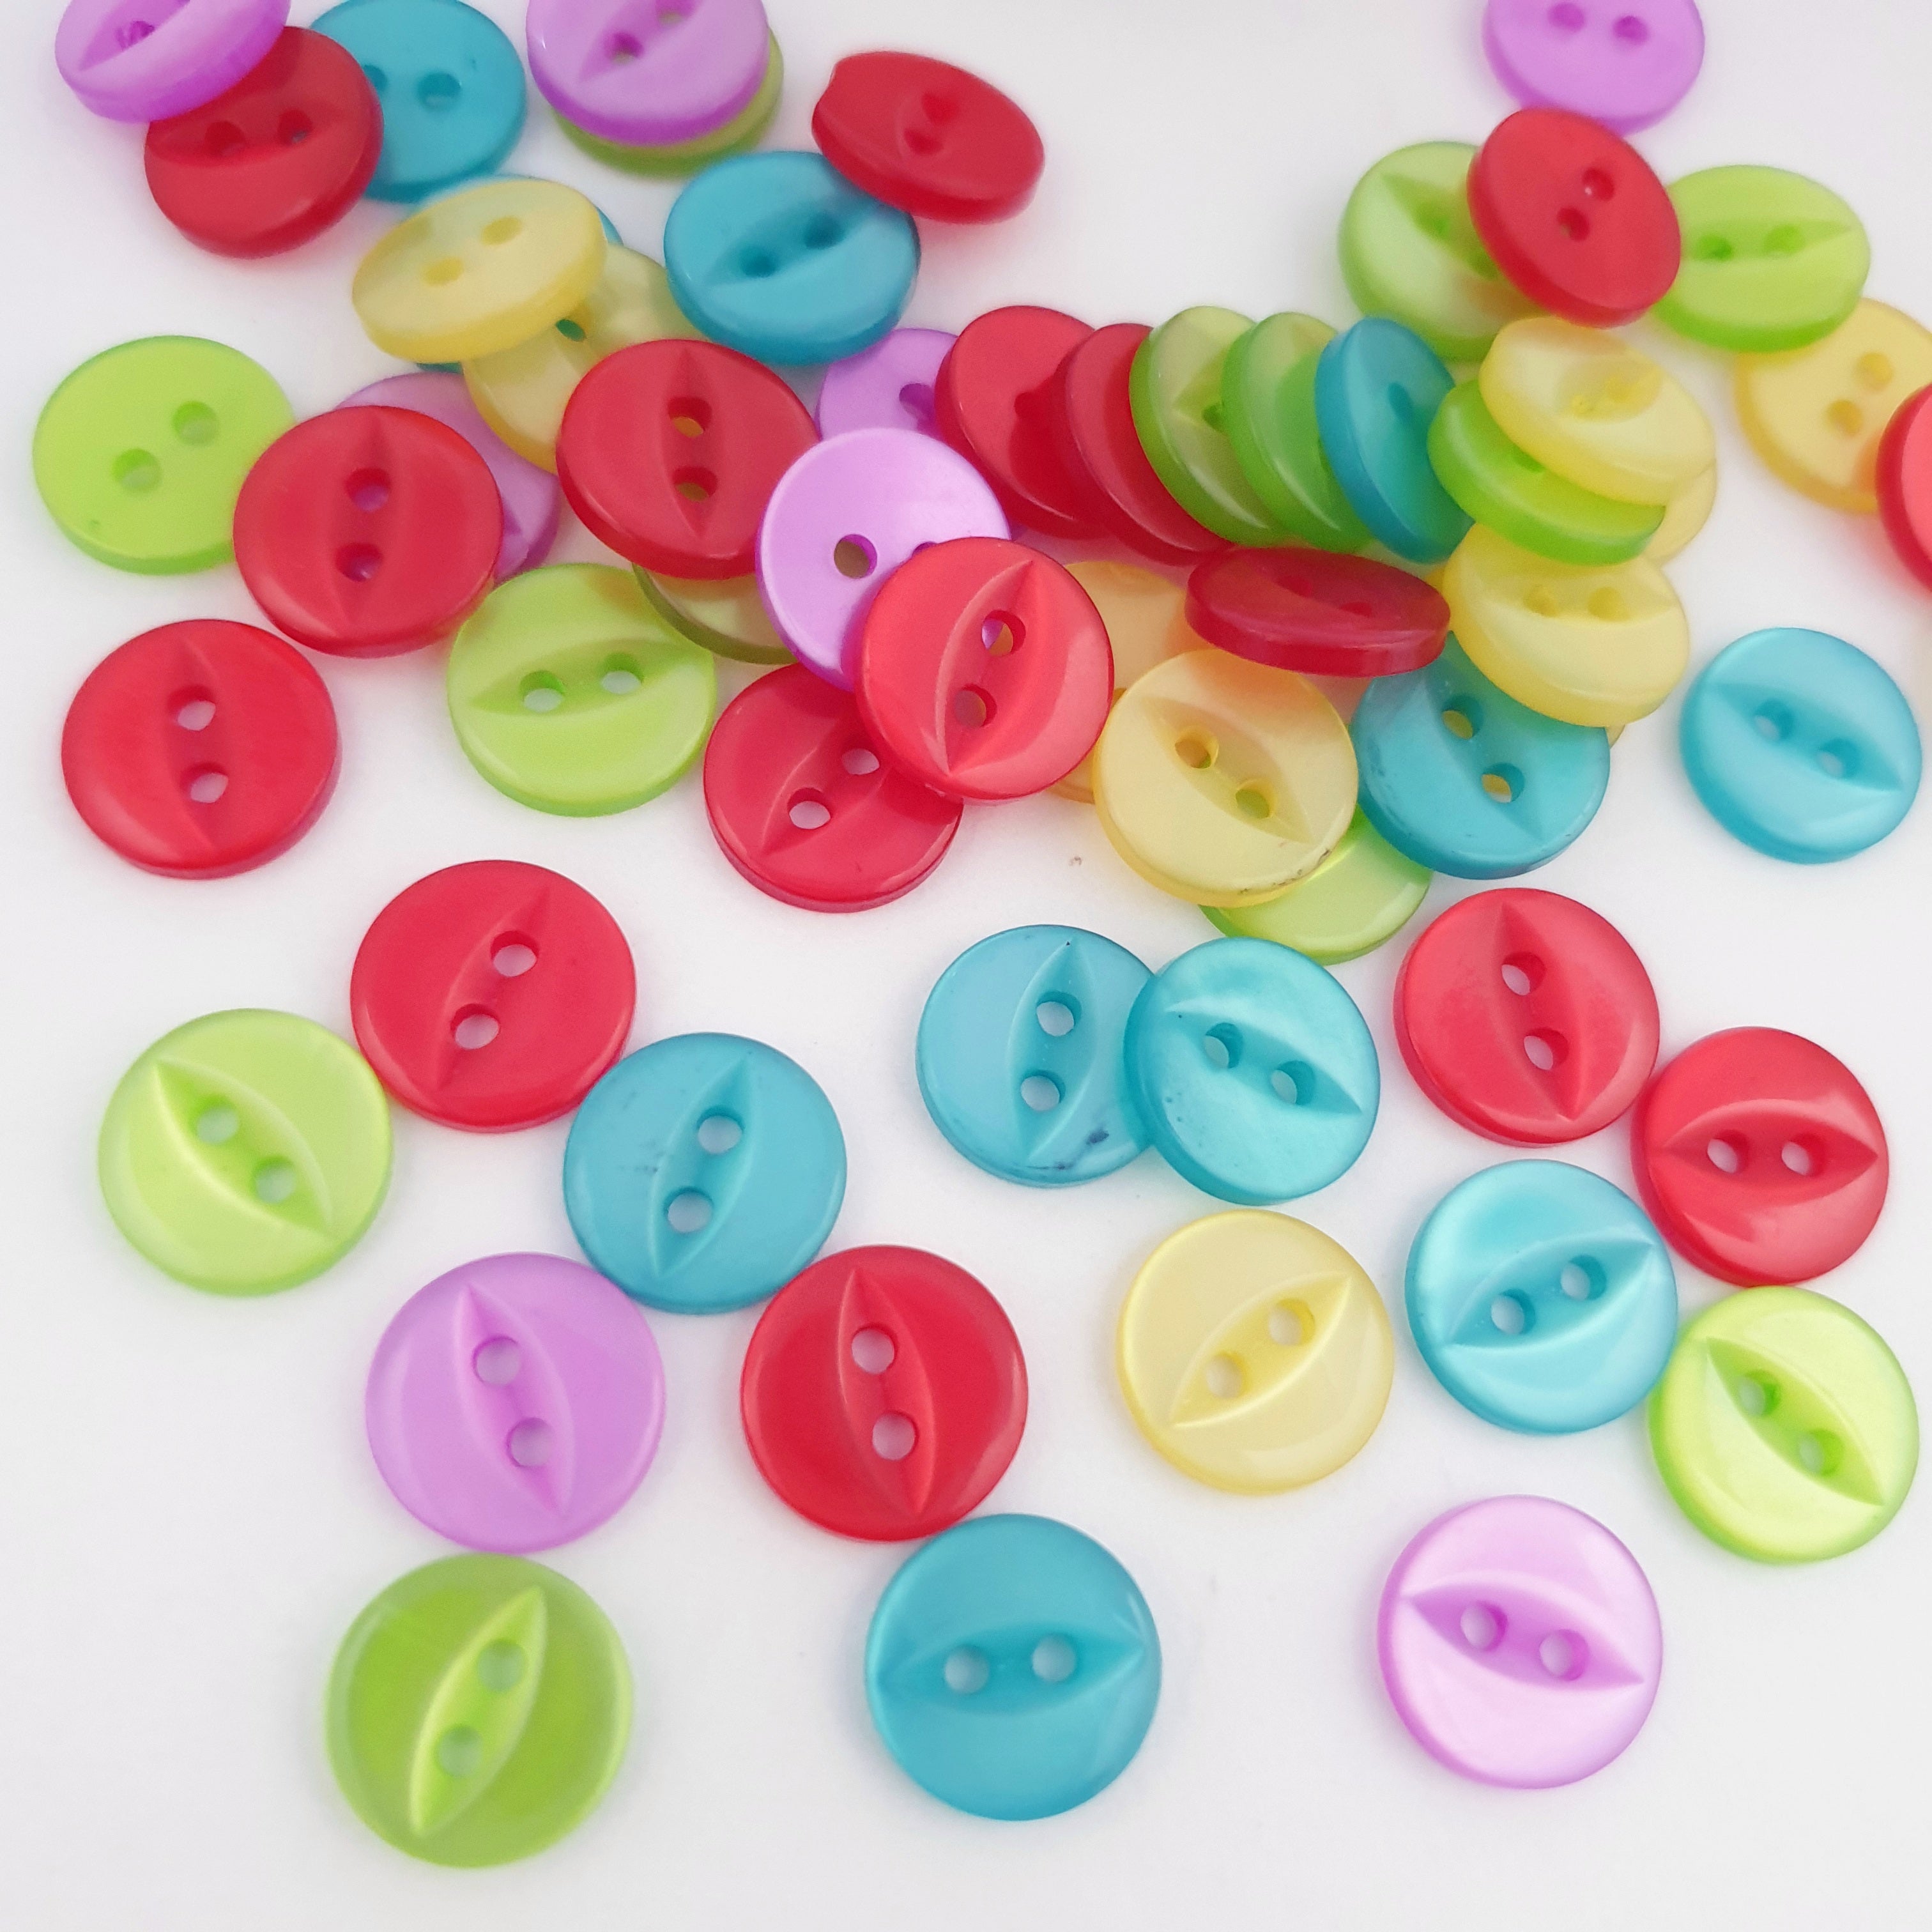 MajorCrafts 98pcs 11mm Mixed Colours Fish Eye 2 Holes Small Round Resin Sewing Buttons